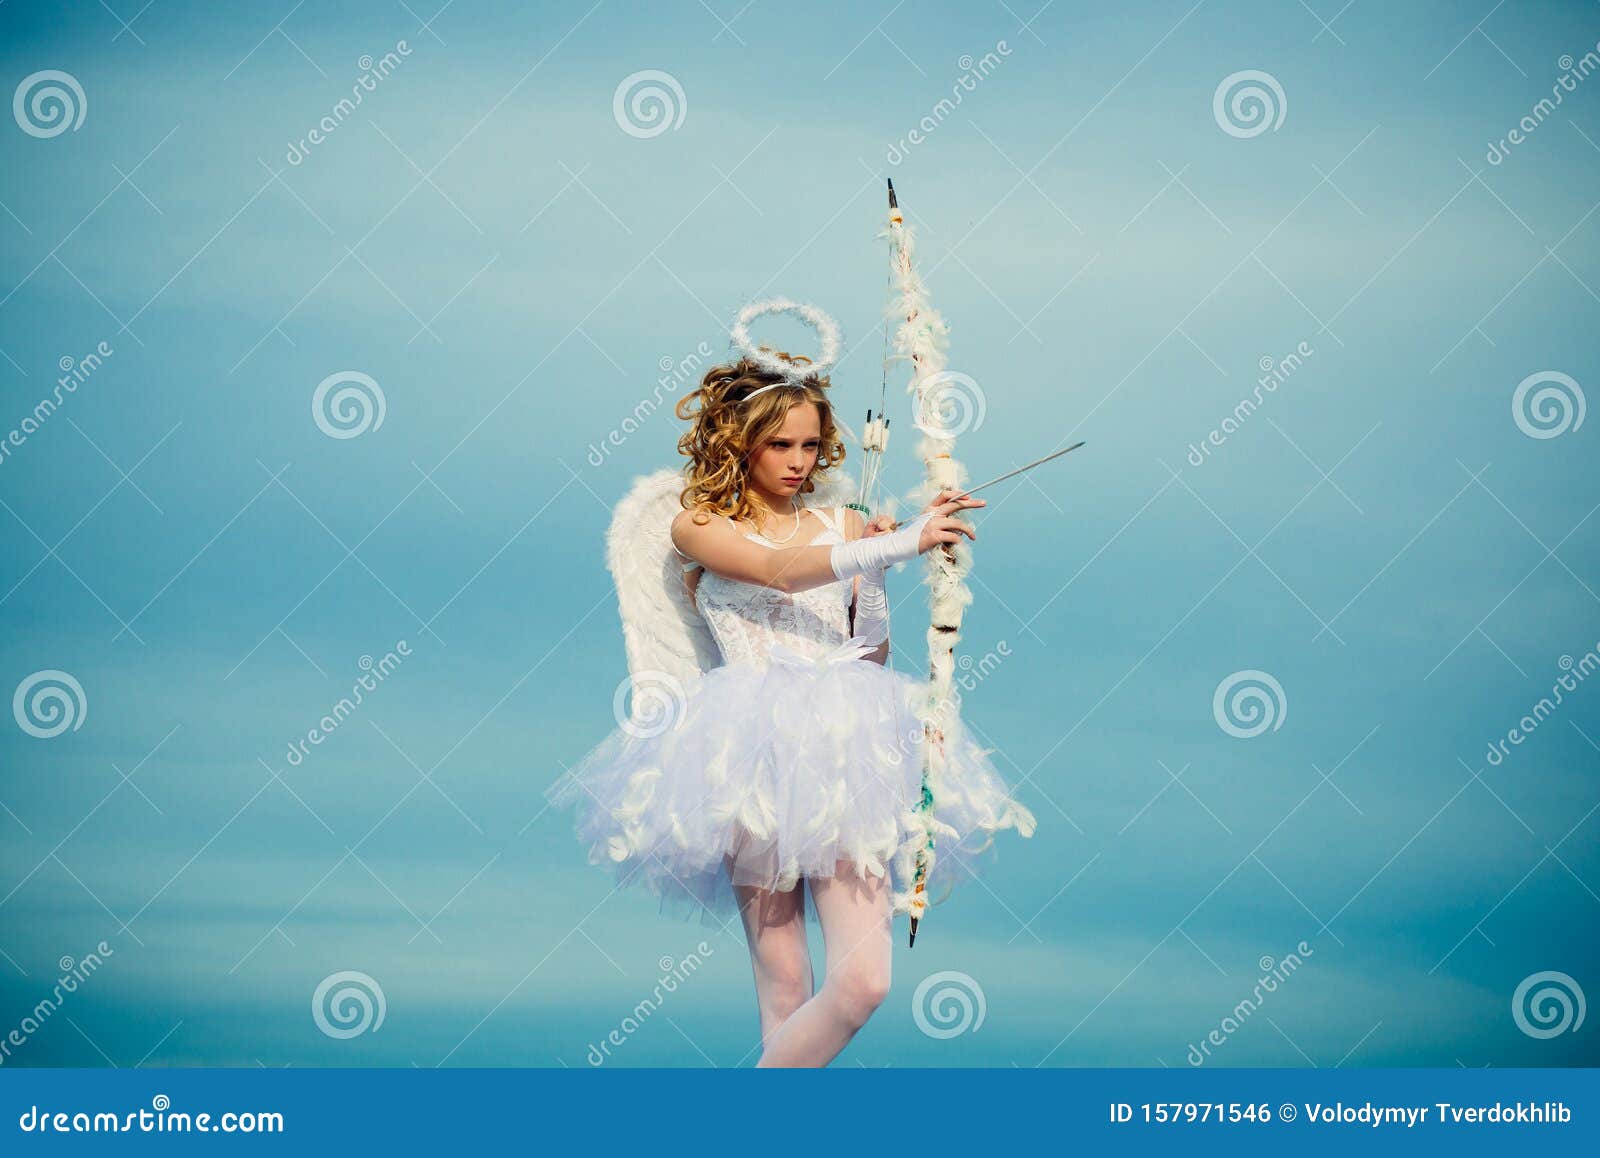 A Child in the Clothes of an Angel on Sky Background - Valentine ...